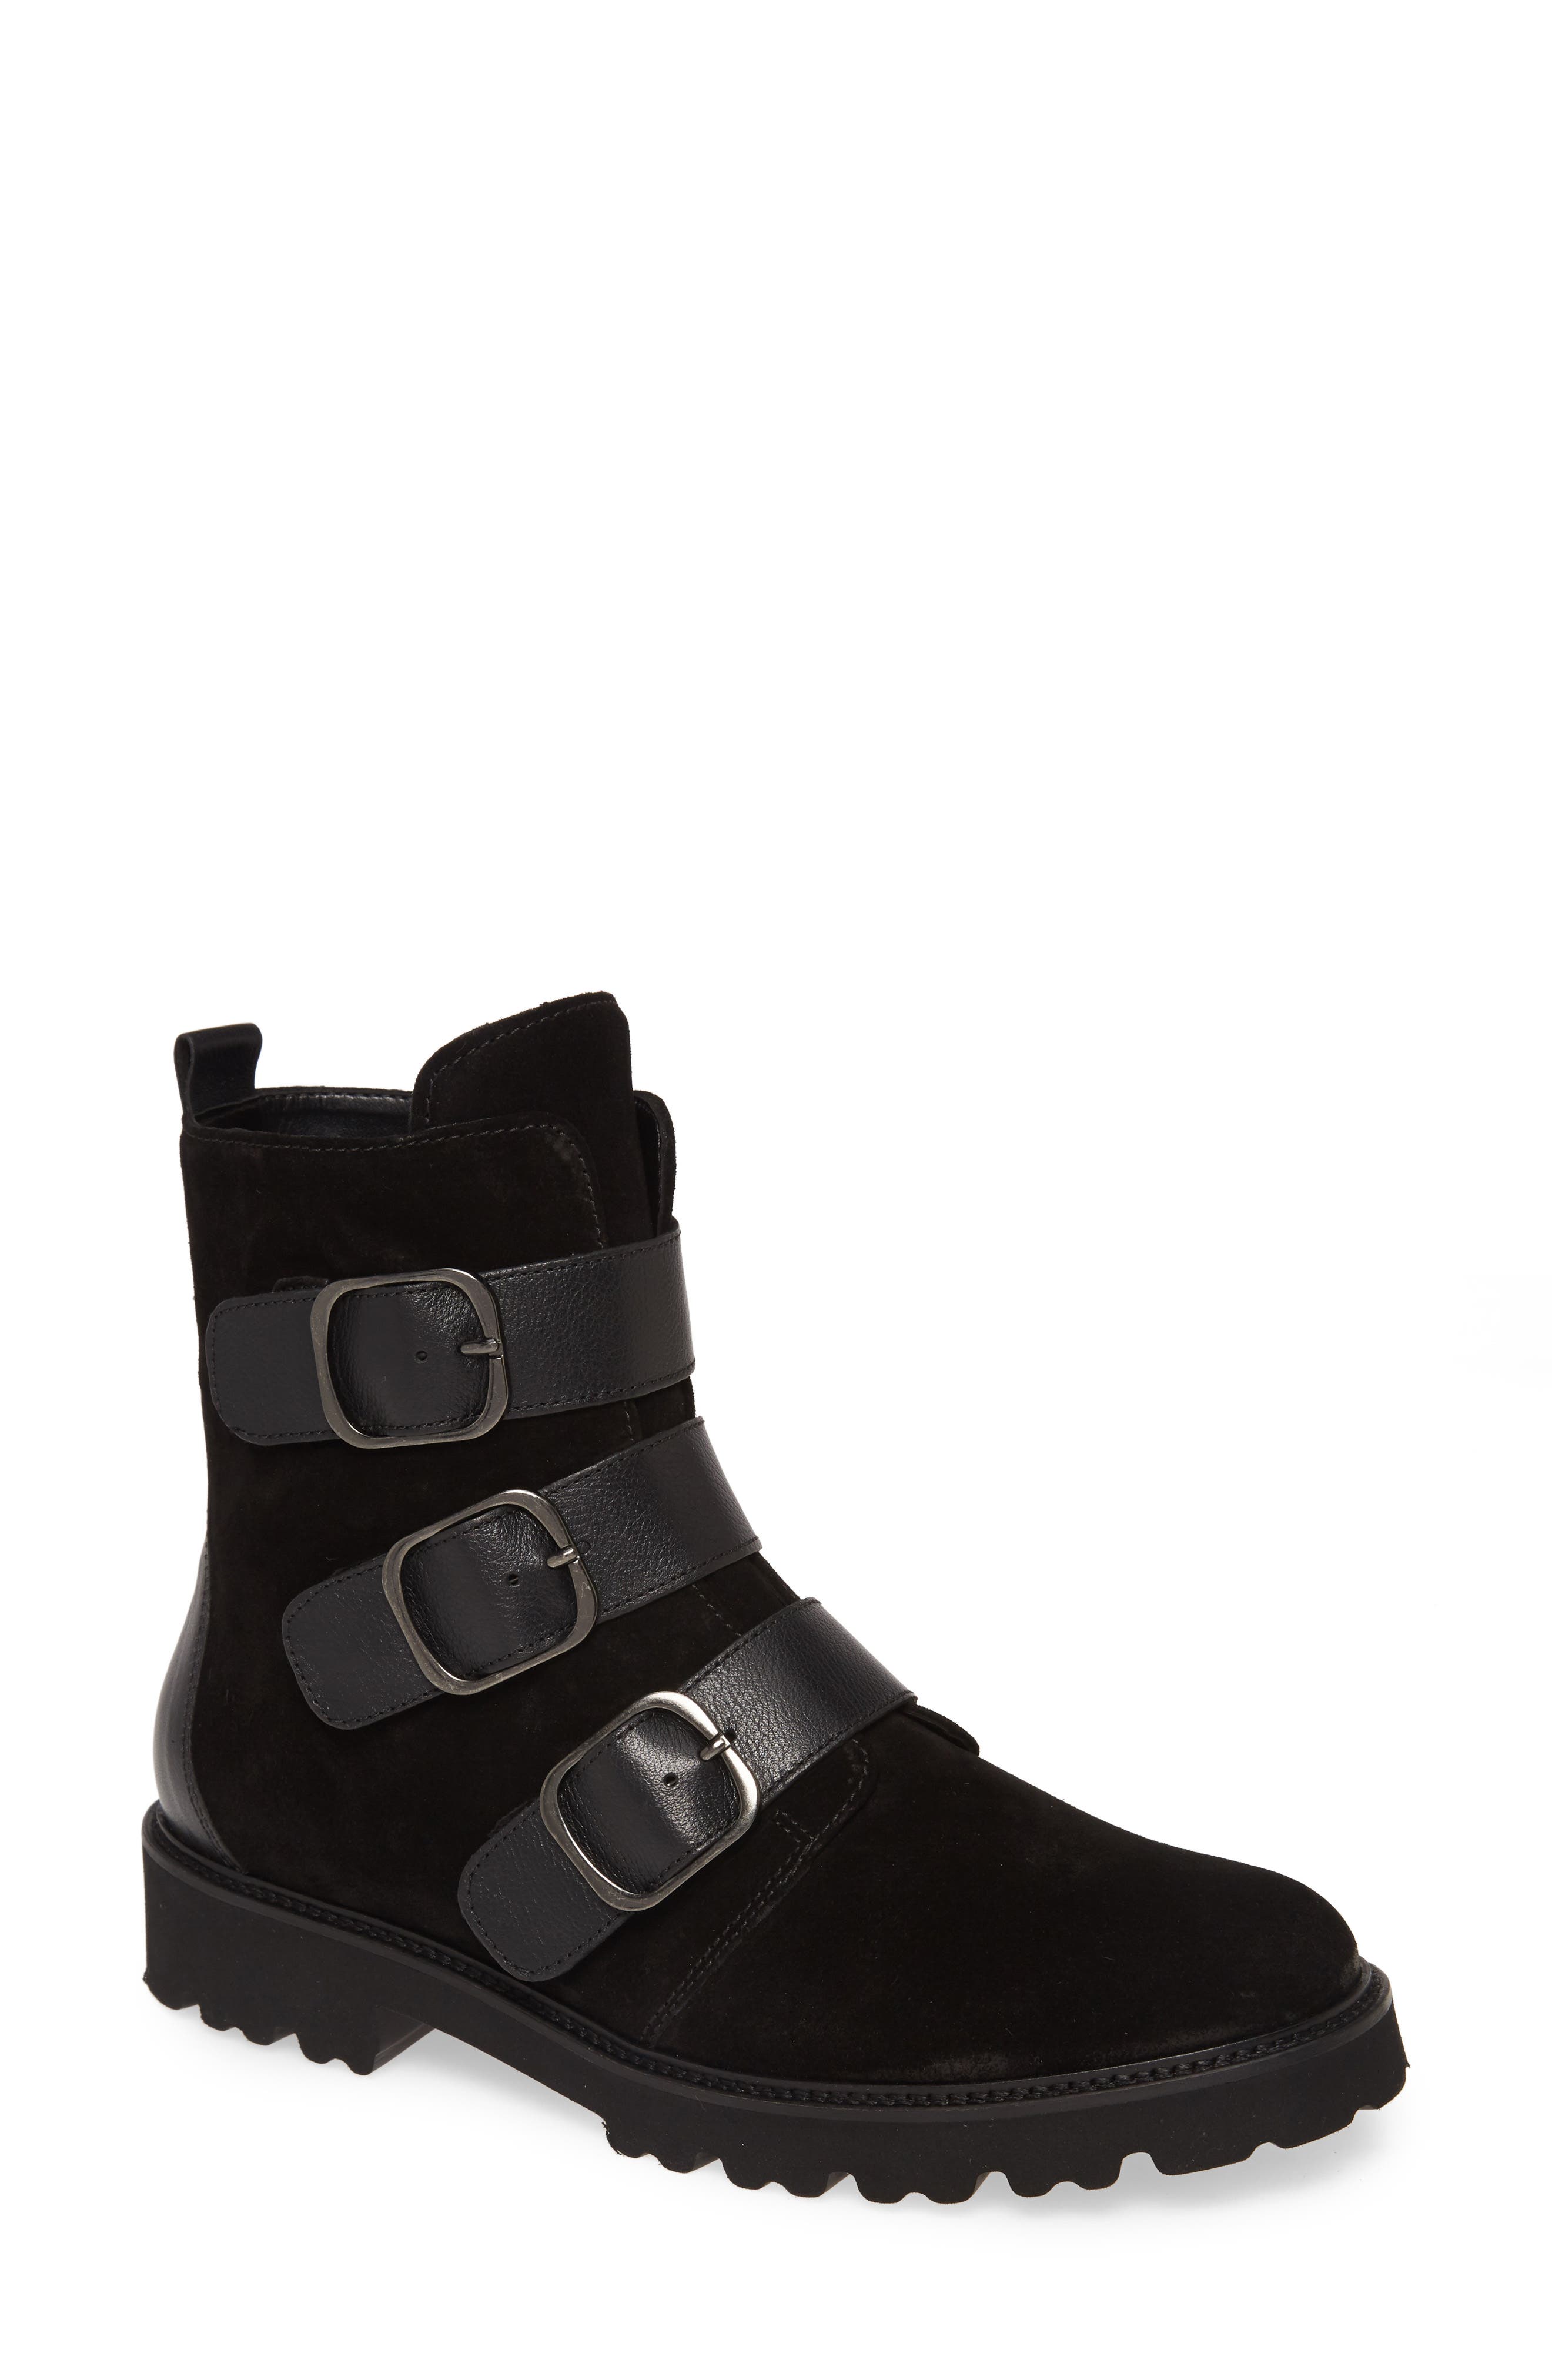 gabor slouch boots